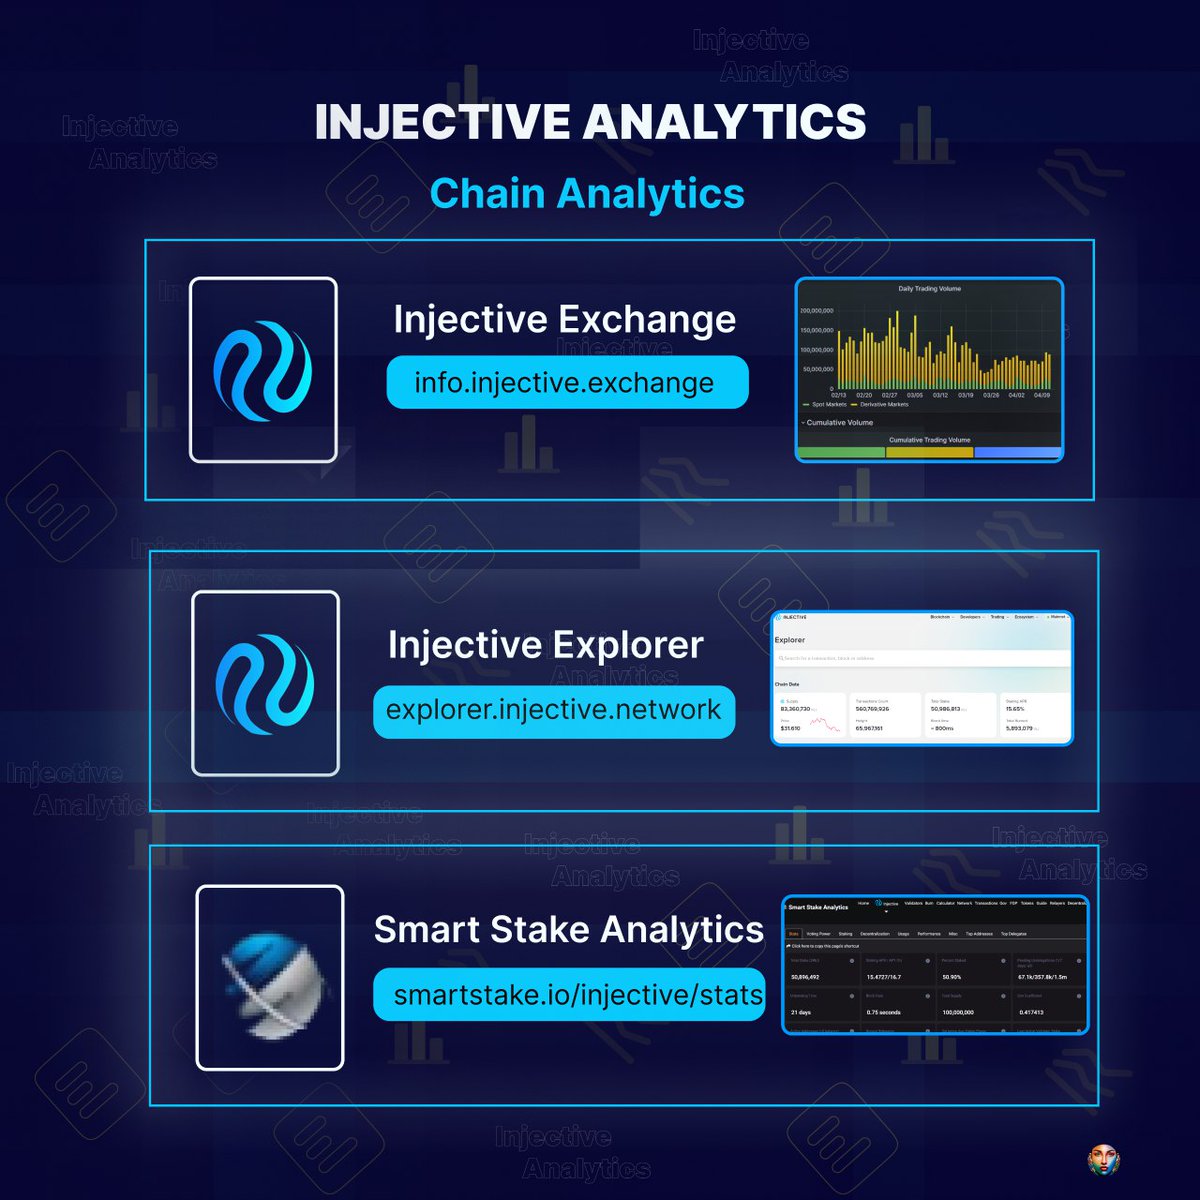 Here are Chain 𝗜𝗻𝗷𝗲𝗰𝘁𝗶𝘃𝗲 𝗔𝗻𝗮𝗹𝘆𝘁𝗶𝗰𝘀 These are websites you can use to track every data that has to to with injective. Data like, - Transaction - Unchain analysis - Statistics It includes; Injective Explorer-> info.injective.exchange Injective Exchange…